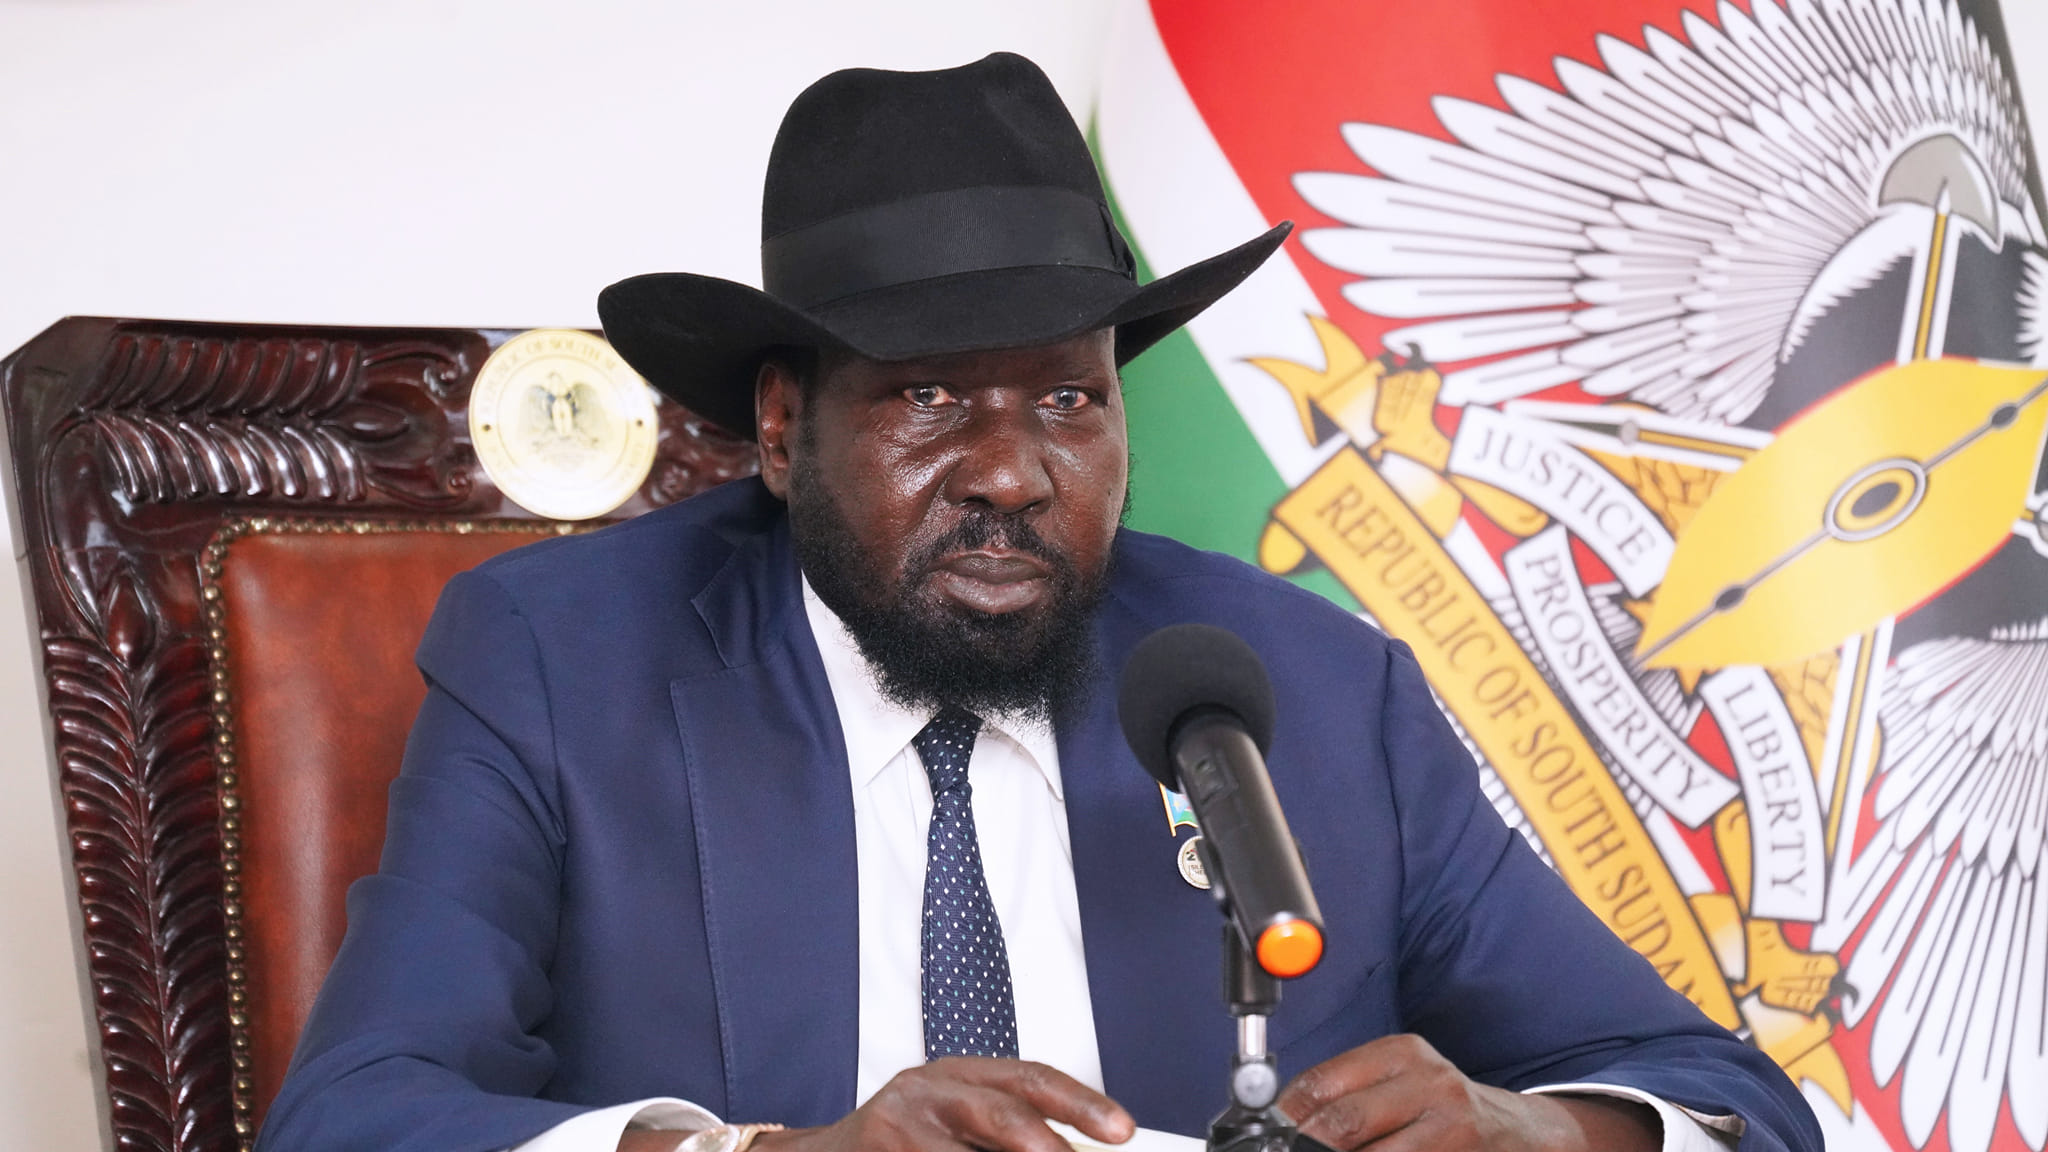 Kiir: No further extension of transitional period